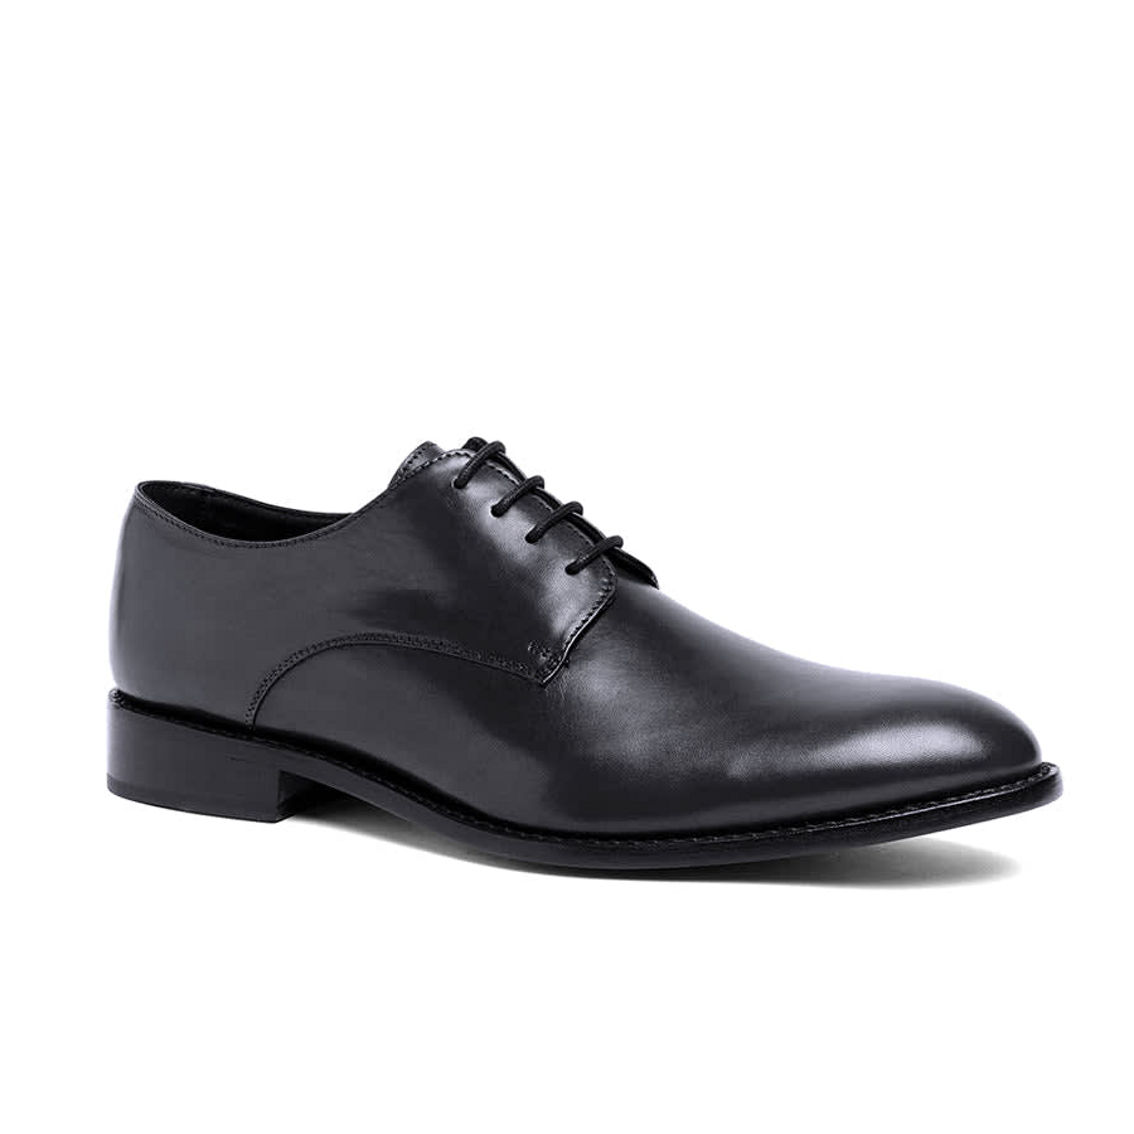 Anthony Veer Mens Truman Derby Goodyear welt Lace-up Dress Shoe - Image 2 of 5